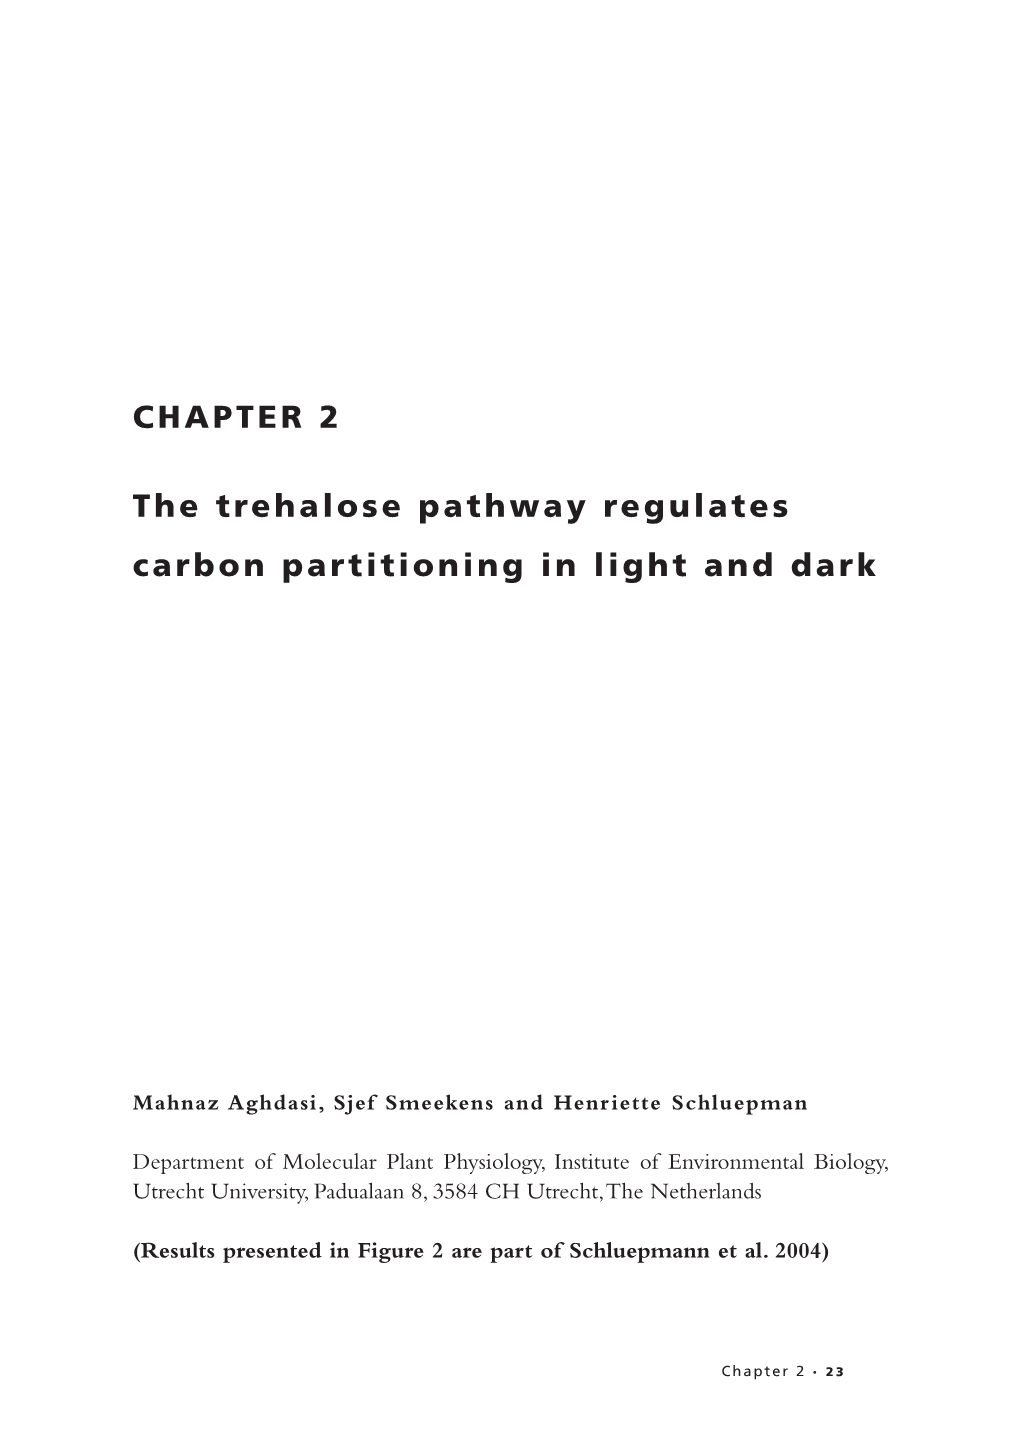 CHAPTER 2 the Trehalose Pathway Regulates Carbon Partitioning In